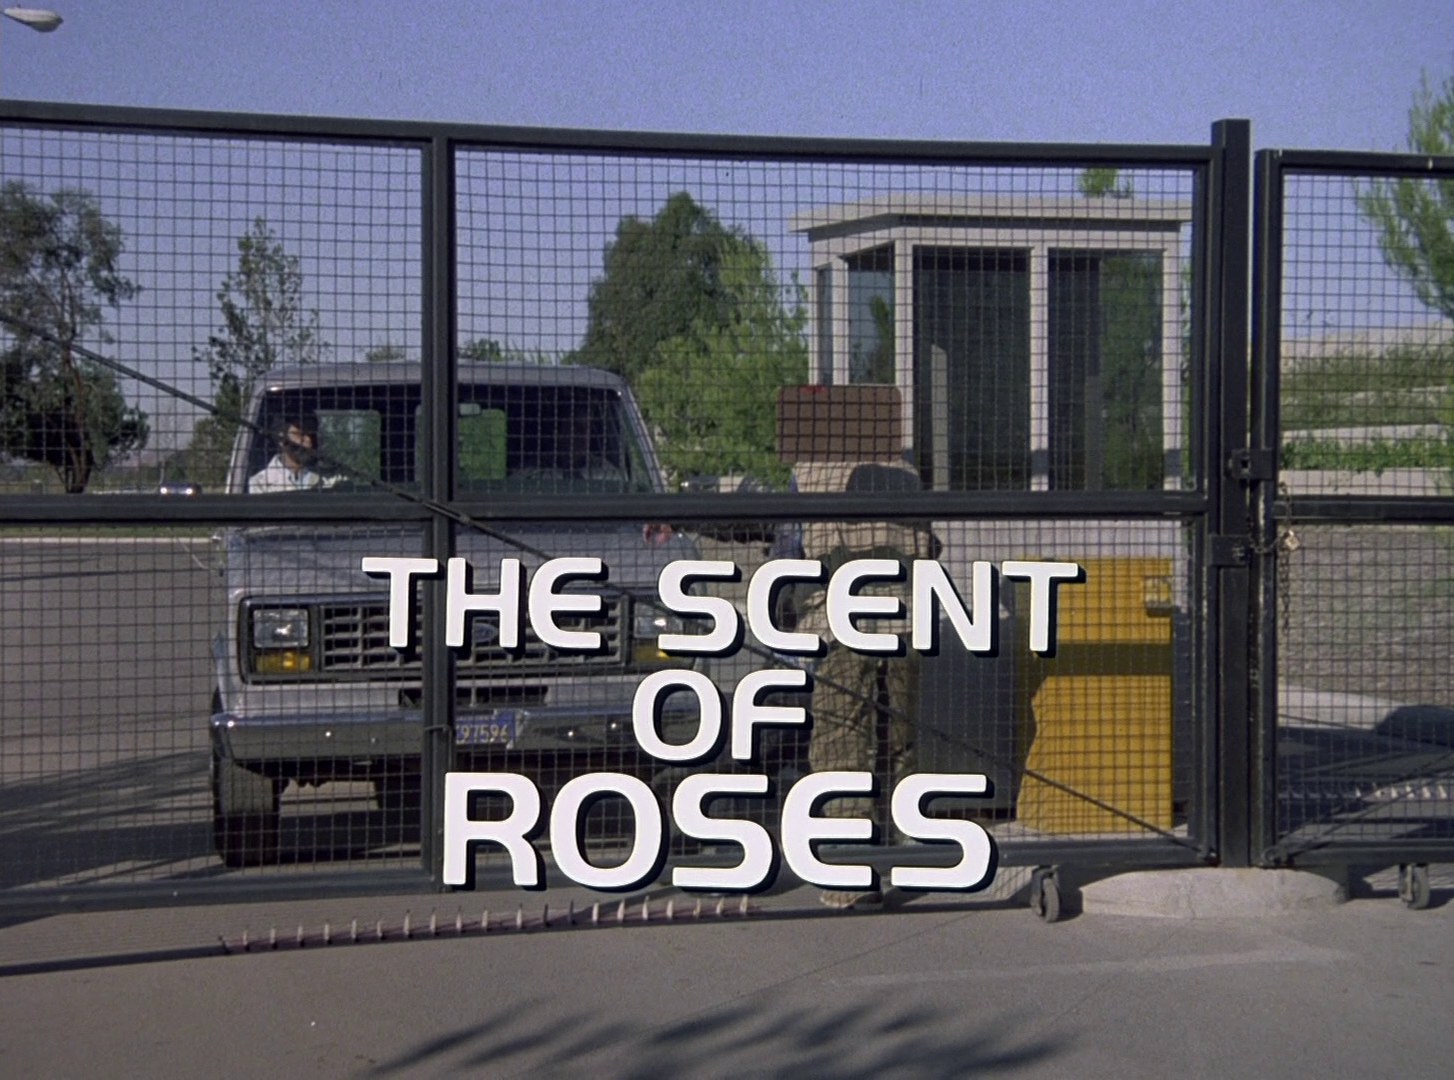 Knight Rider Season 4 - Episode 74 - The Scent Of Roses - Photo 1